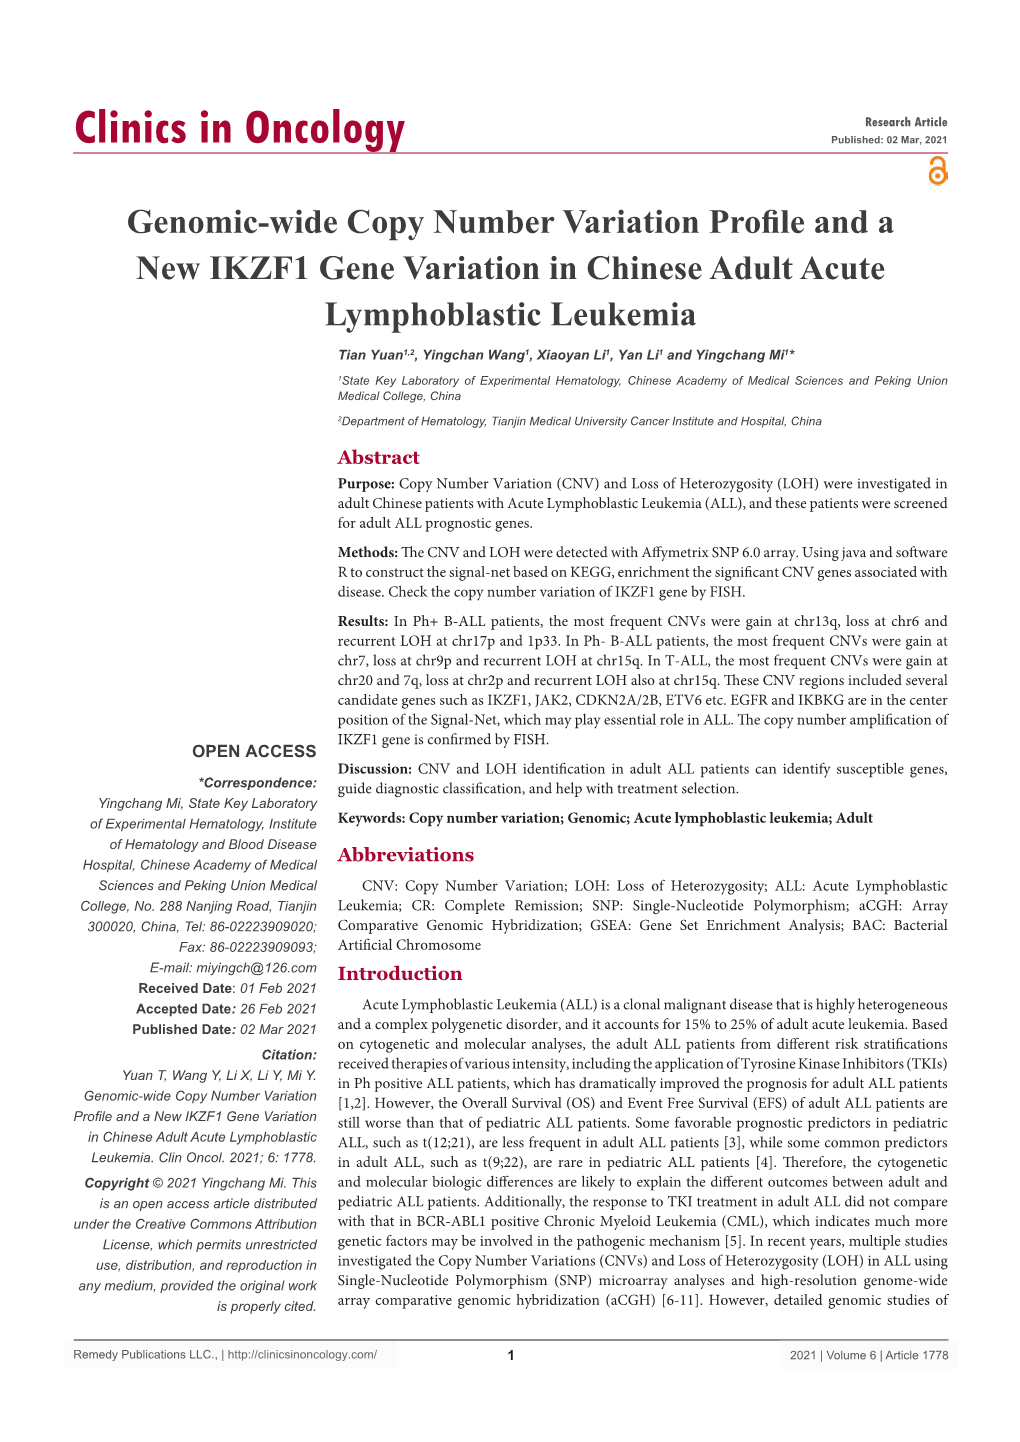 Genomic-Wide Copy Number Variation Profile and a New IKZF1 Gene Variation in Chinese Adult Acute Lymphoblastic Leukemia